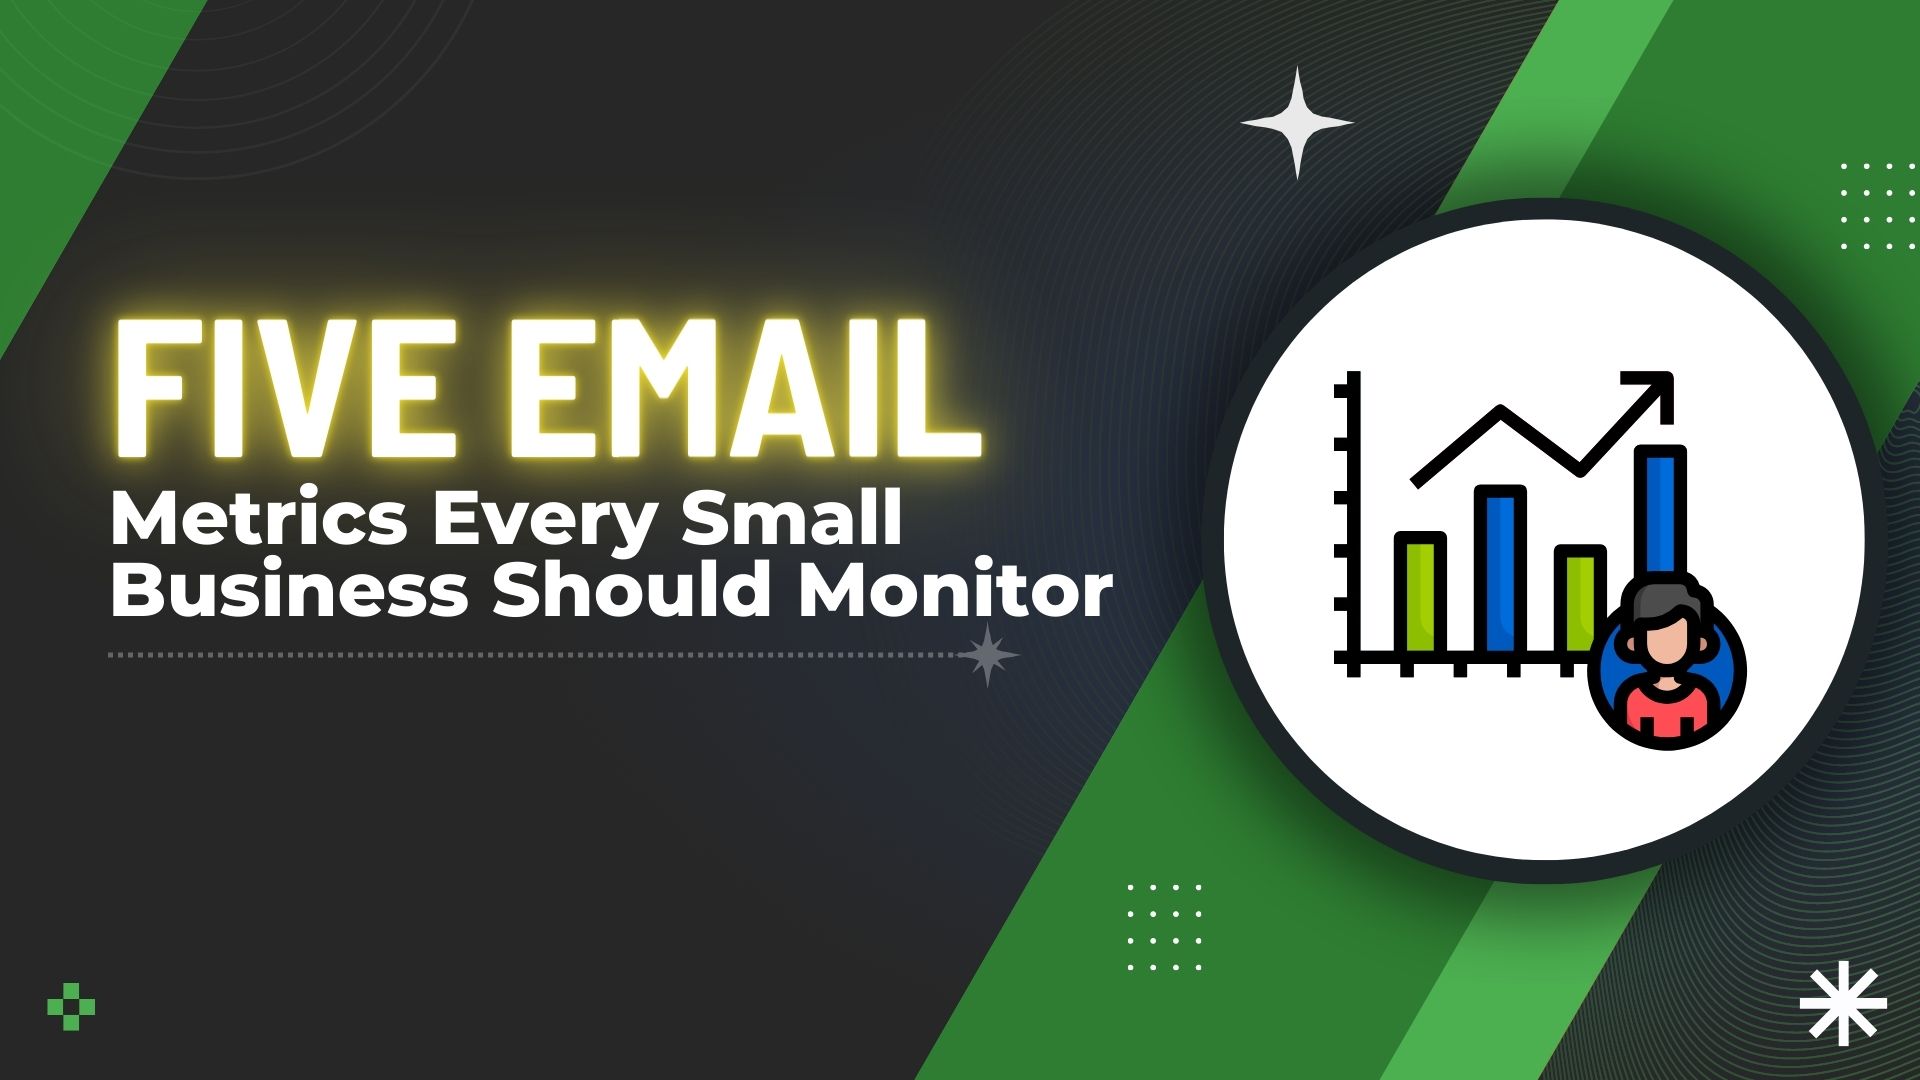 Five Email Metrics Every Small Business Should Monitor